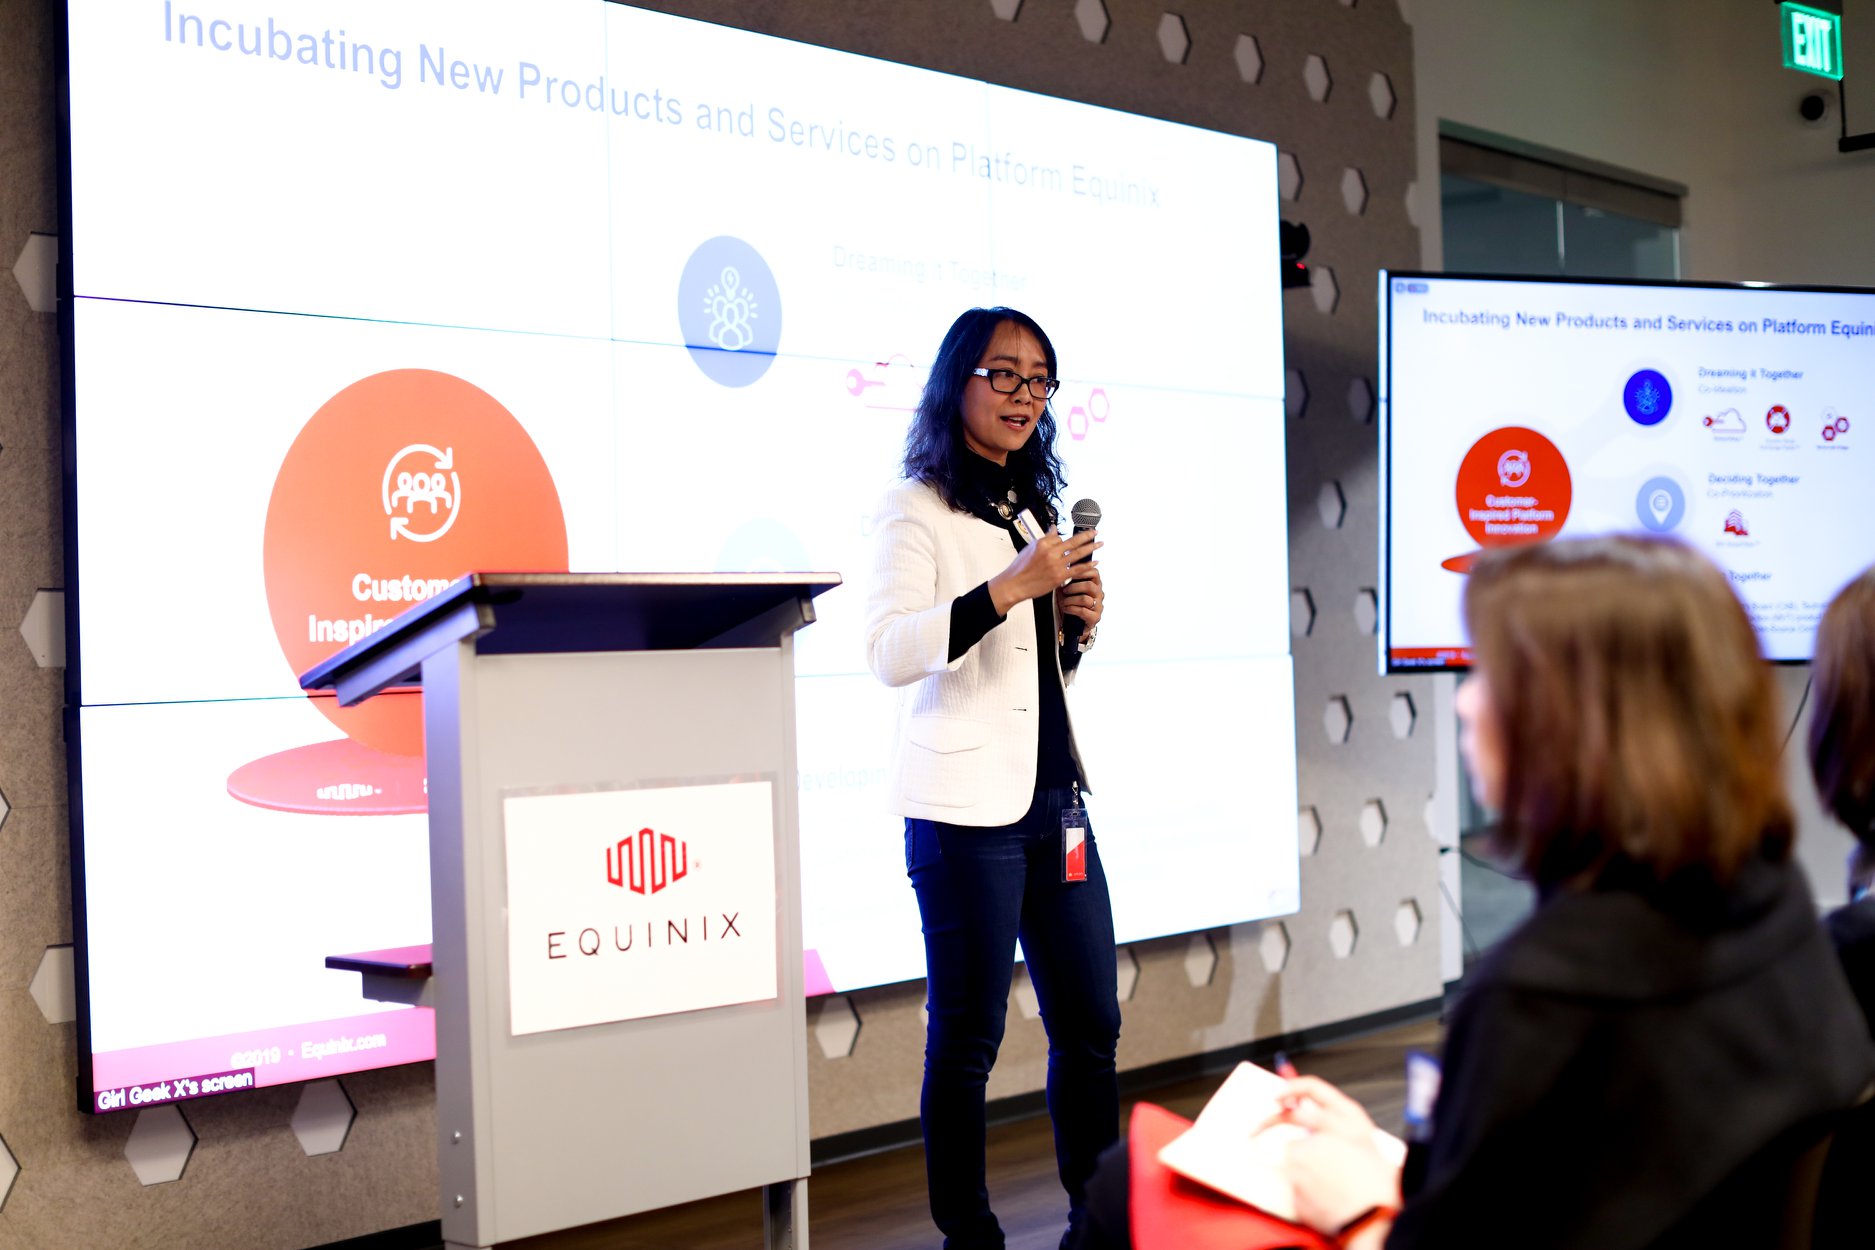 Director of Product Engineering Dr. Danjue Li gives talk on “turning customer-inspired innovation into new product offerings” at Equinix Girl Geek Dinner 2019